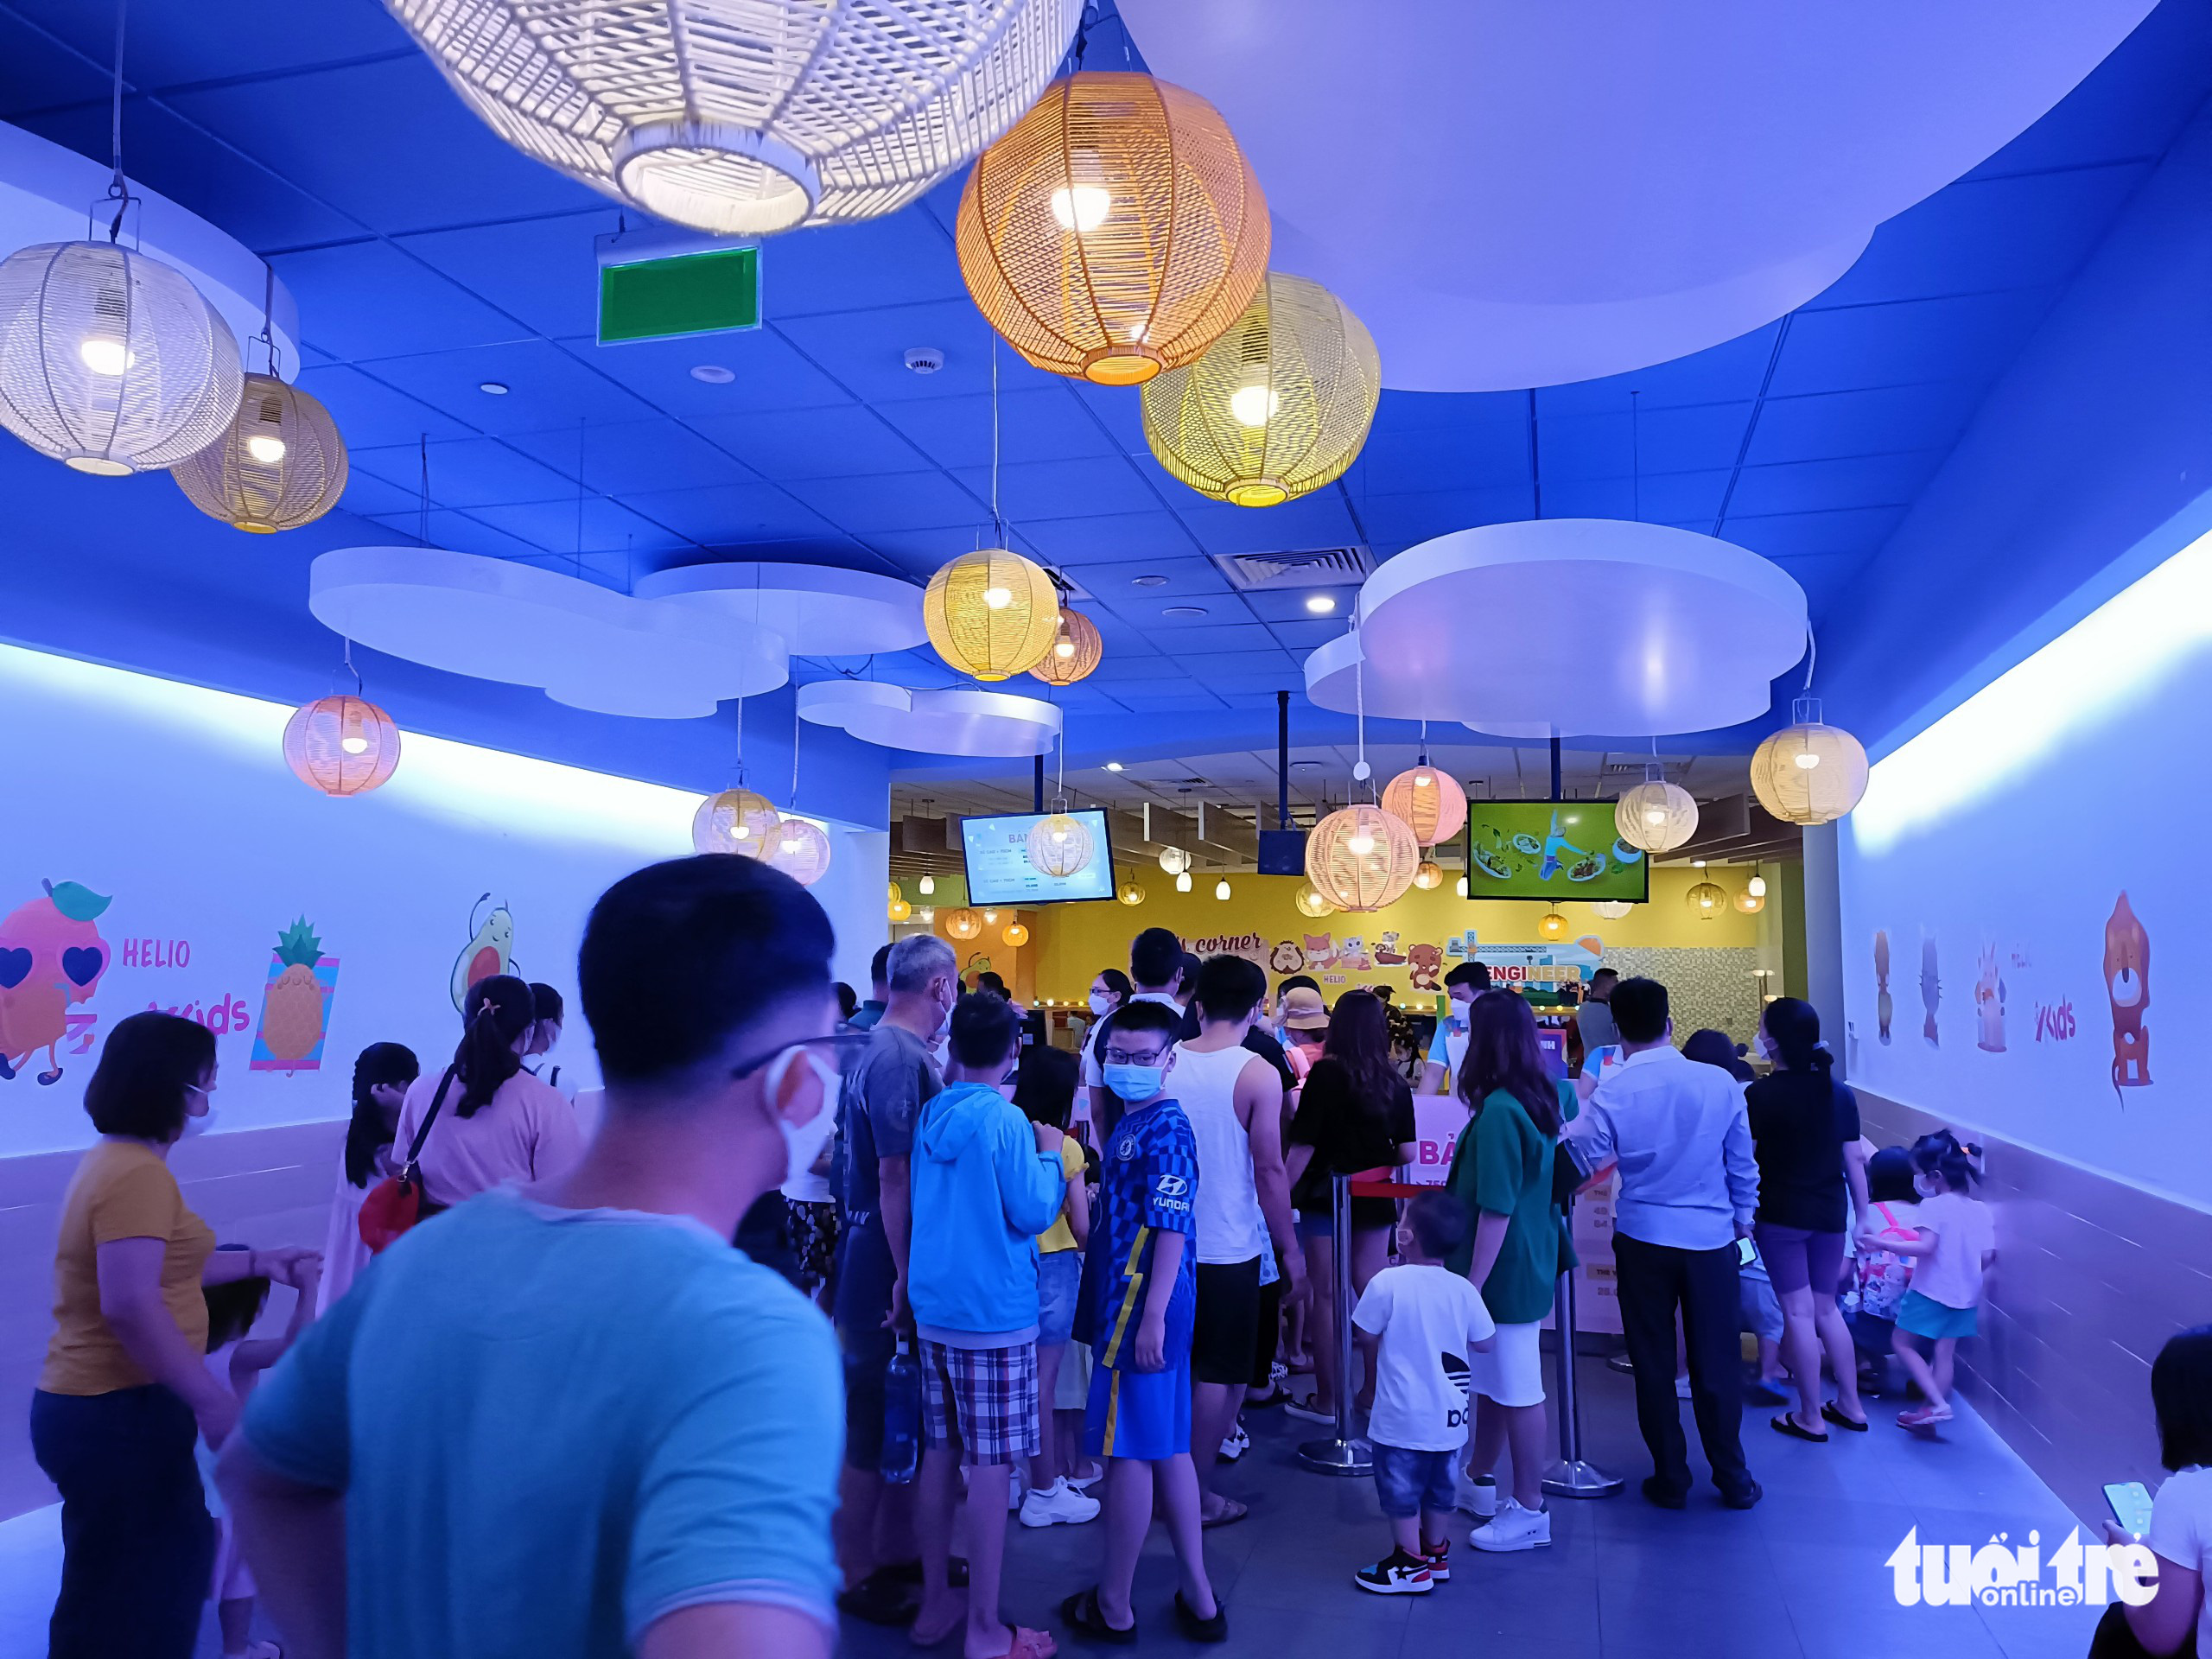 People wait for their turn to play a game at the Helio Center entertainment complex in Da Nang City, Vietnam. Photo: Truong Trung / Tuoi Tre